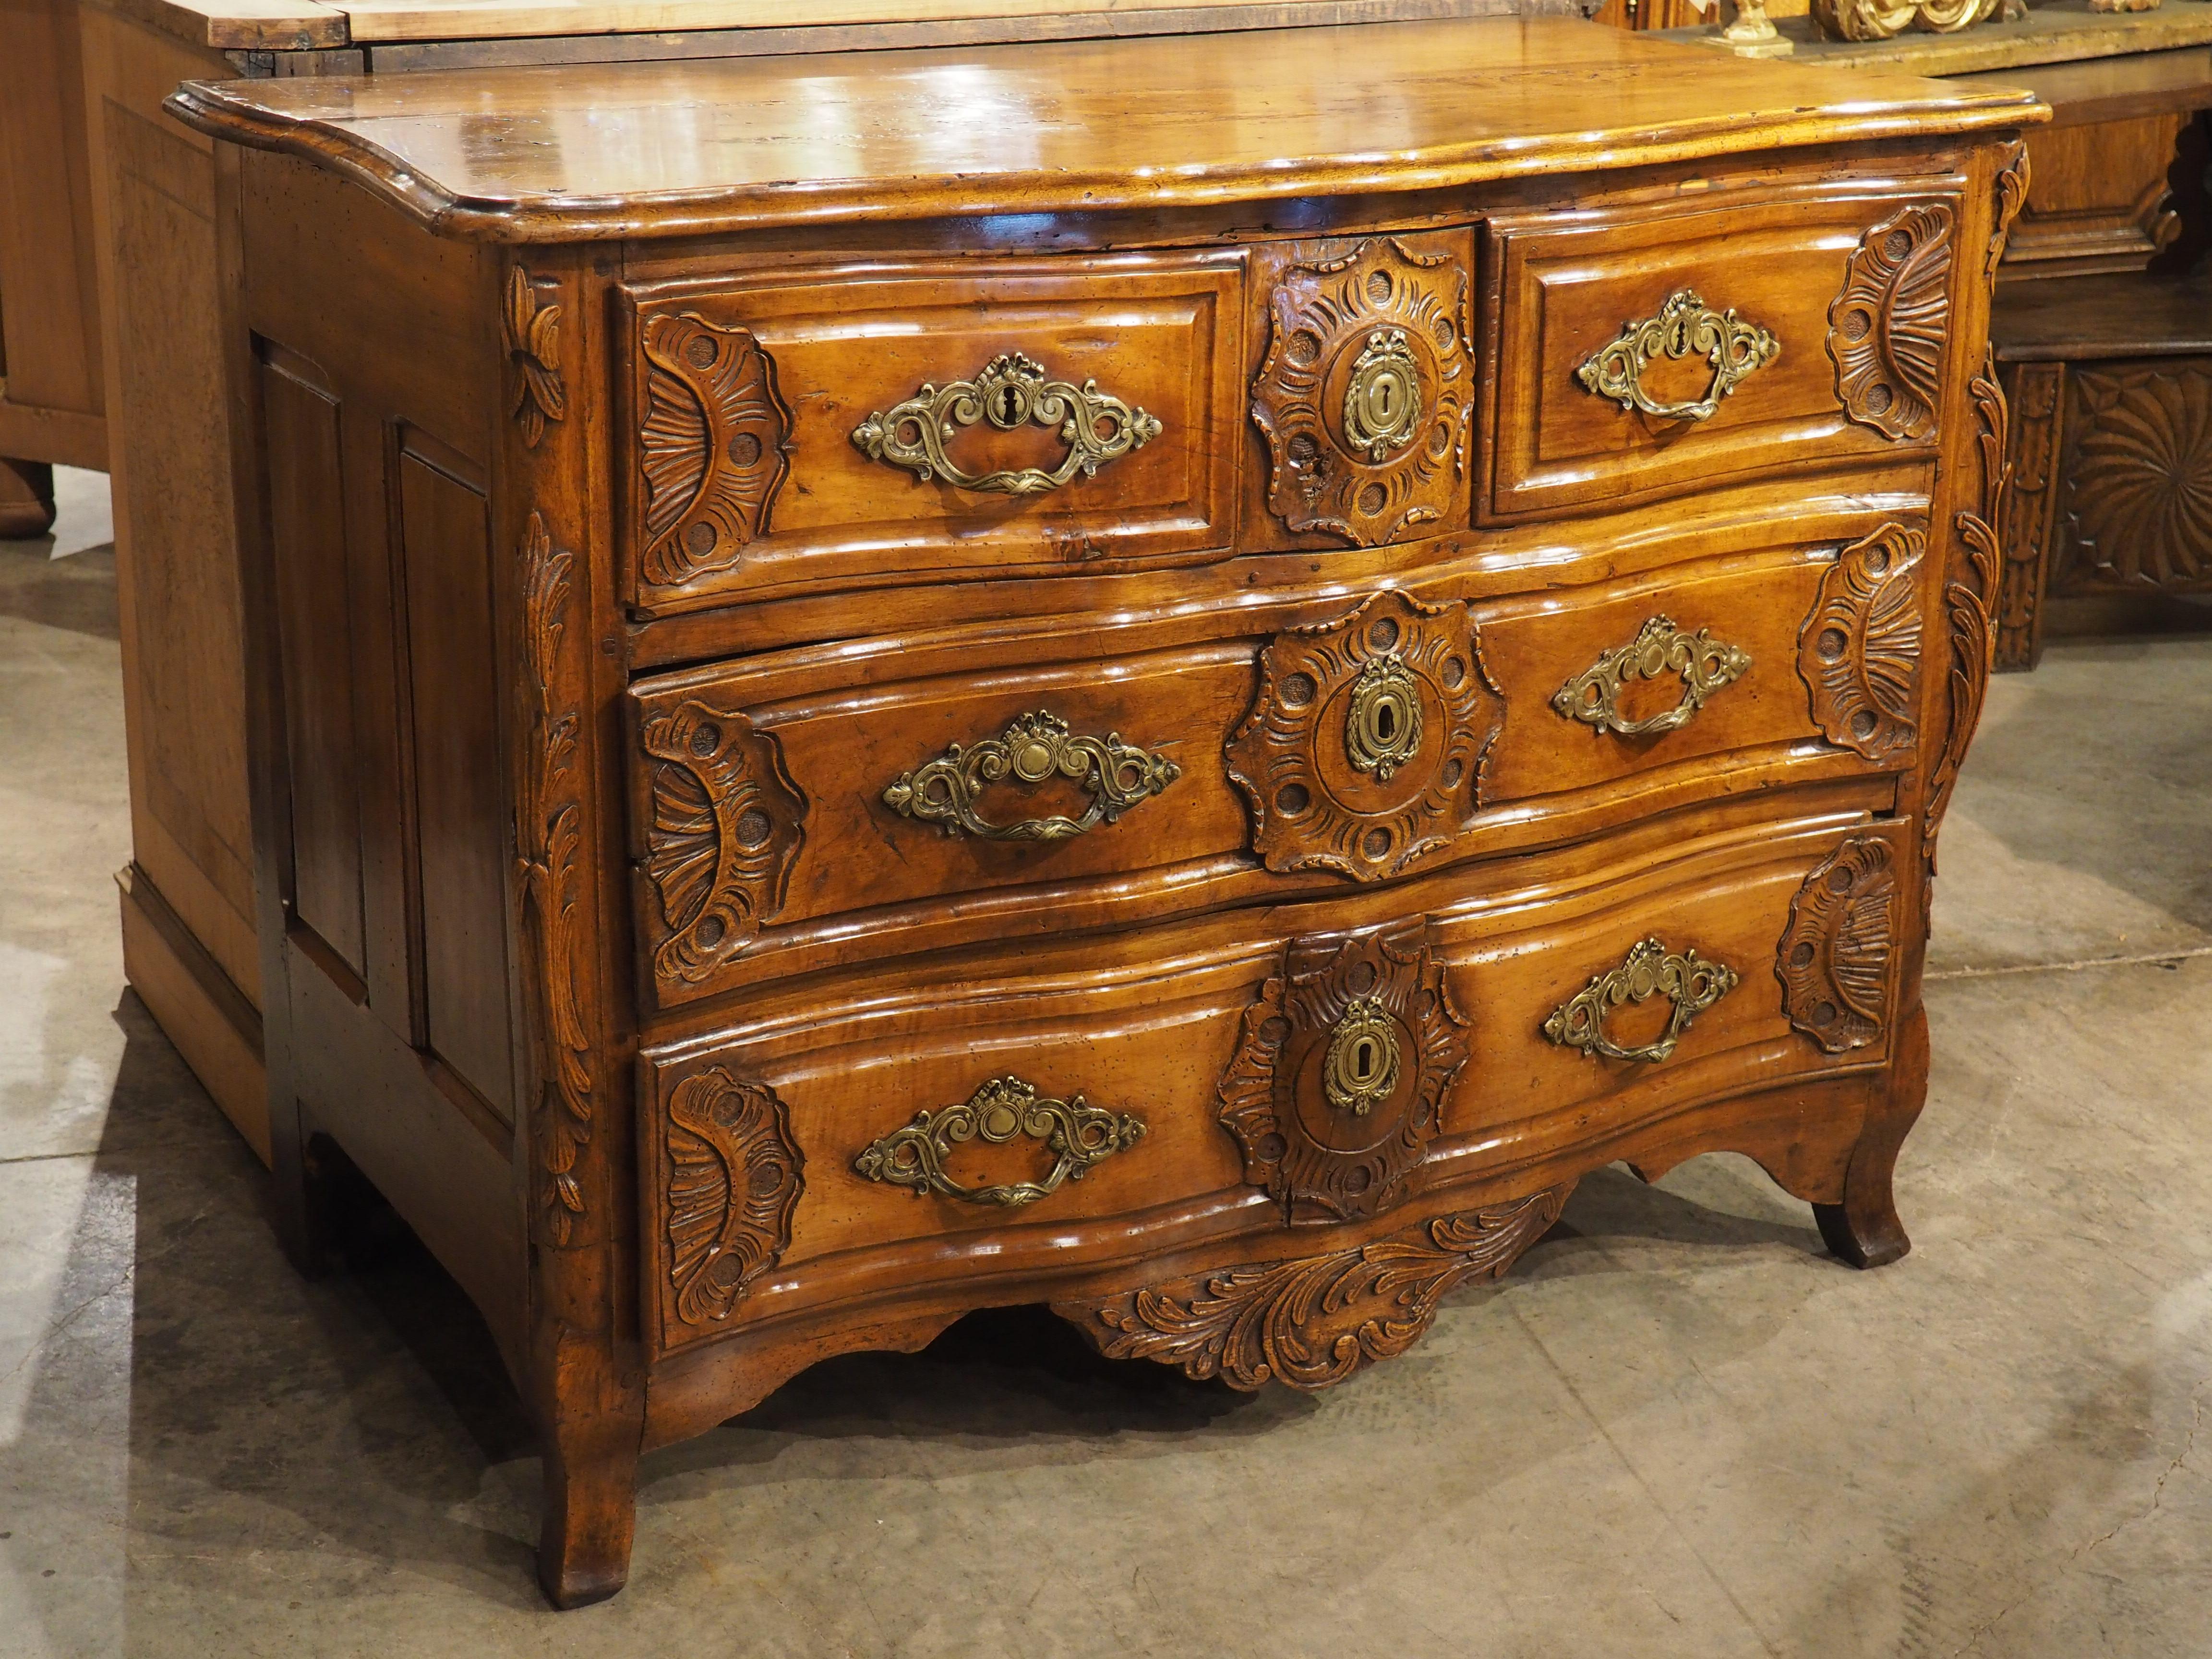 French 18th Century Regence Period Carved Walnut Lyonnaise Commode 'Arbalete' For Sale